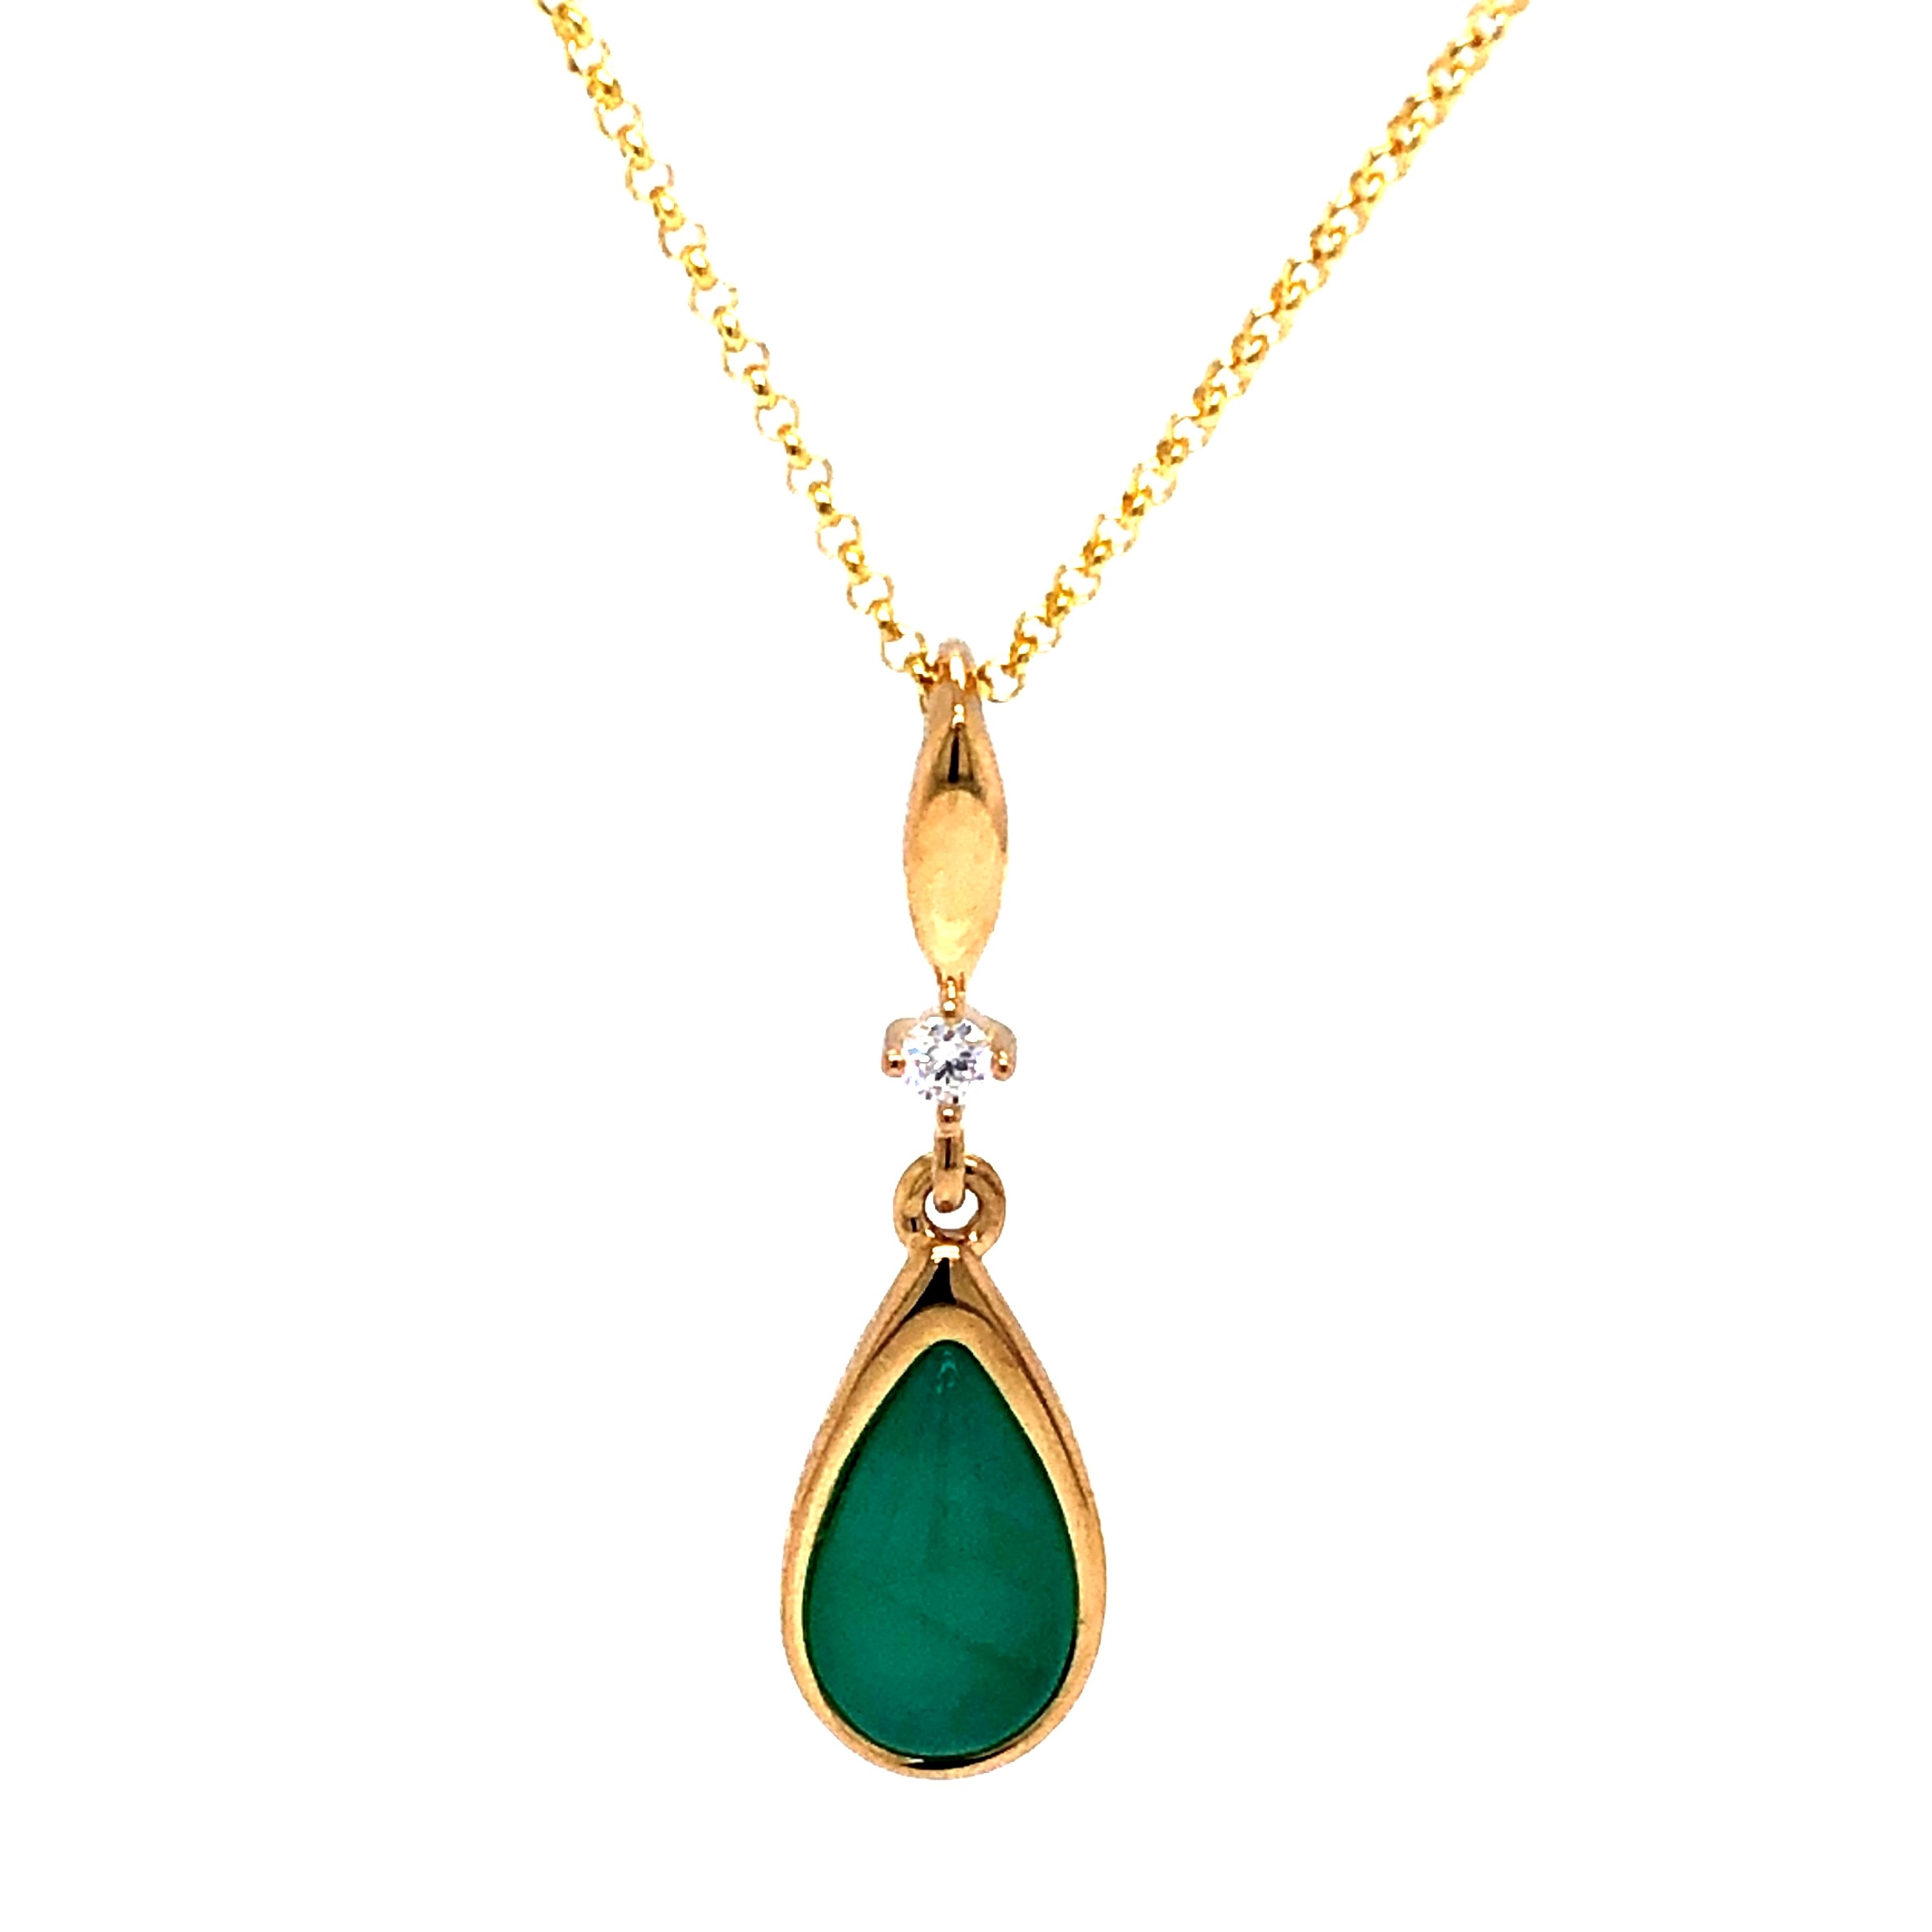 14 Karat Yellow Gold Pendant with One Round Brilliant Diamond and Once Pear Shaped Chrysoprase Inlay.